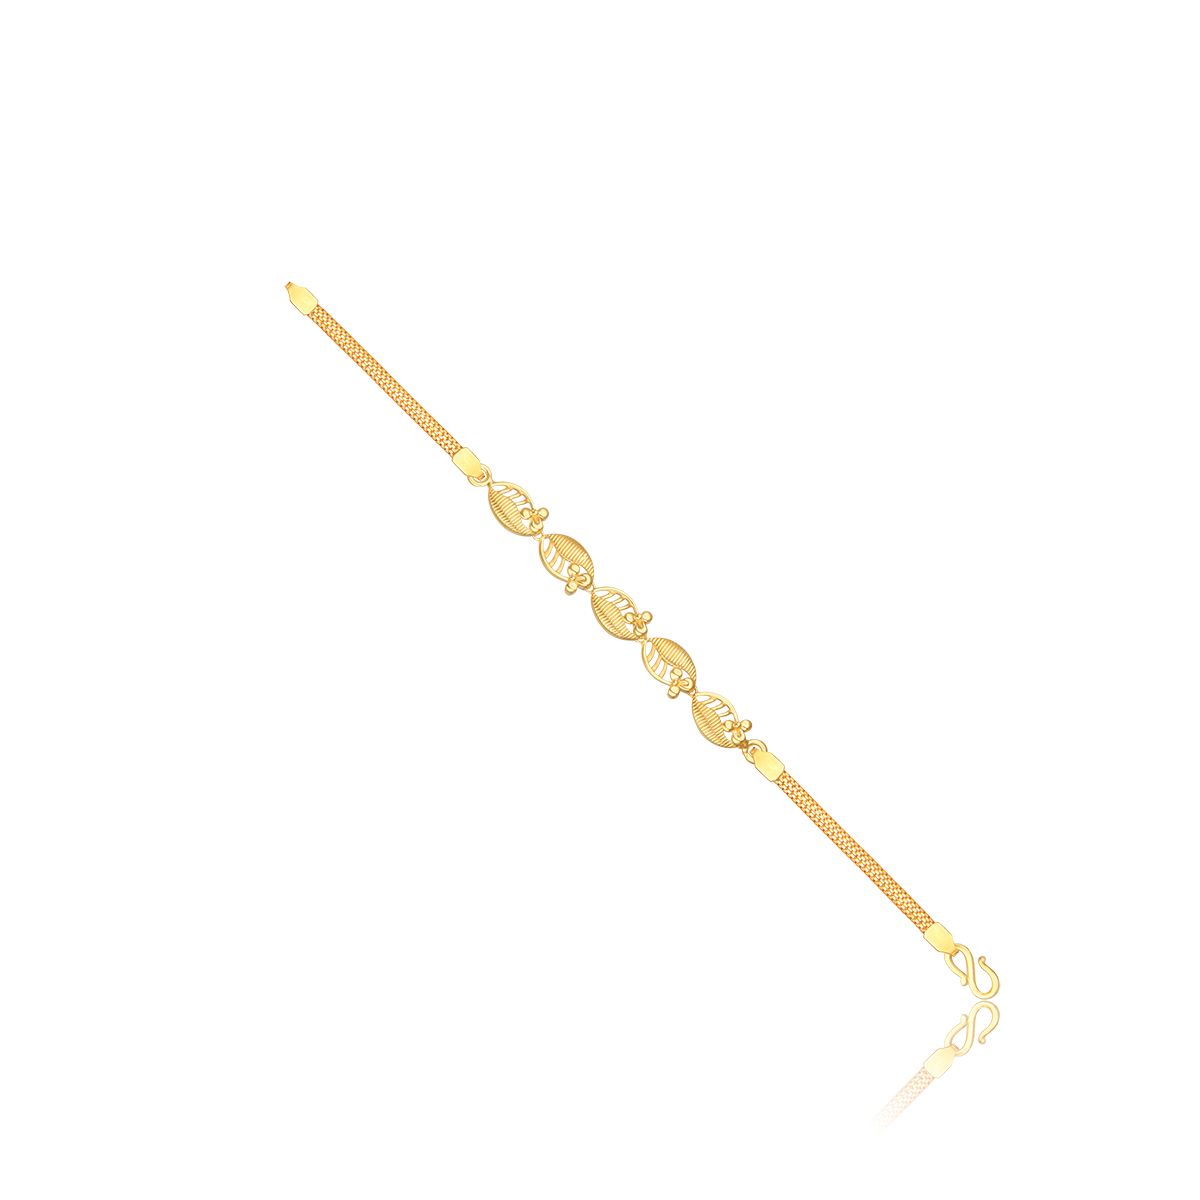 Buy Gorgeous 22kt Yellow Gold Solid Excellent Design Chain Online